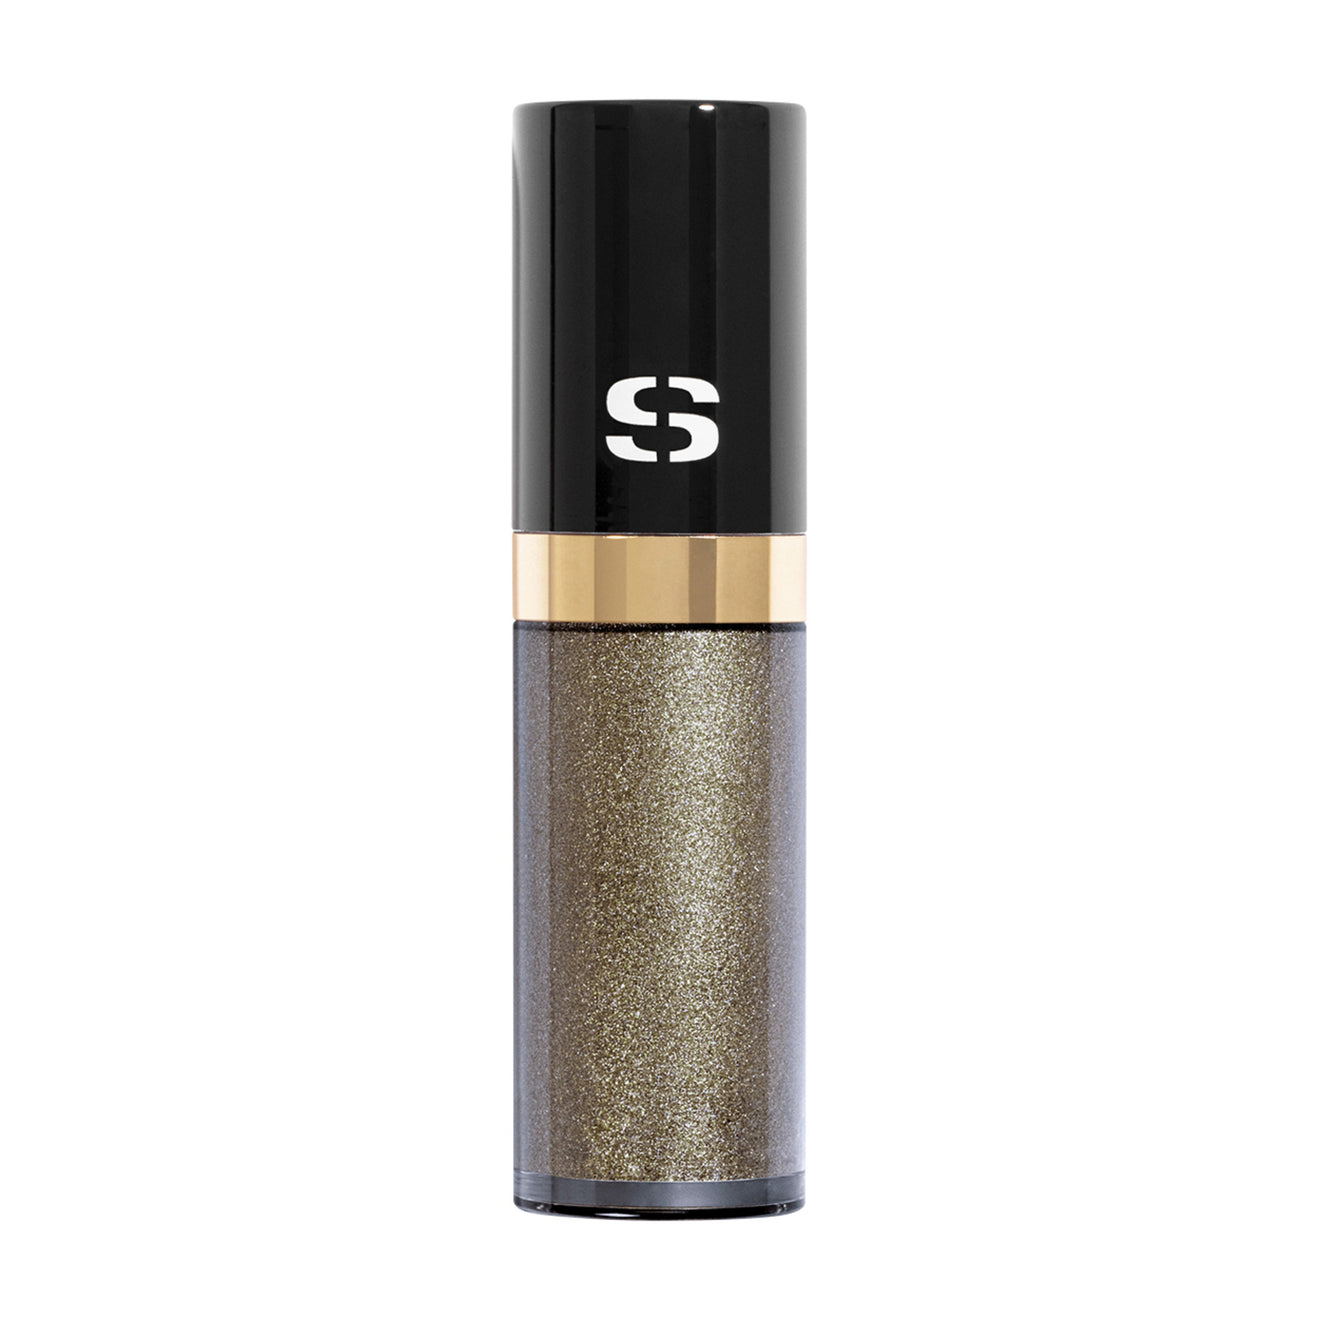 Sisley-Paris Ombre Éclat Liquide Eyeshadow Color/Shade variant: Wild main image. This product is in the color green